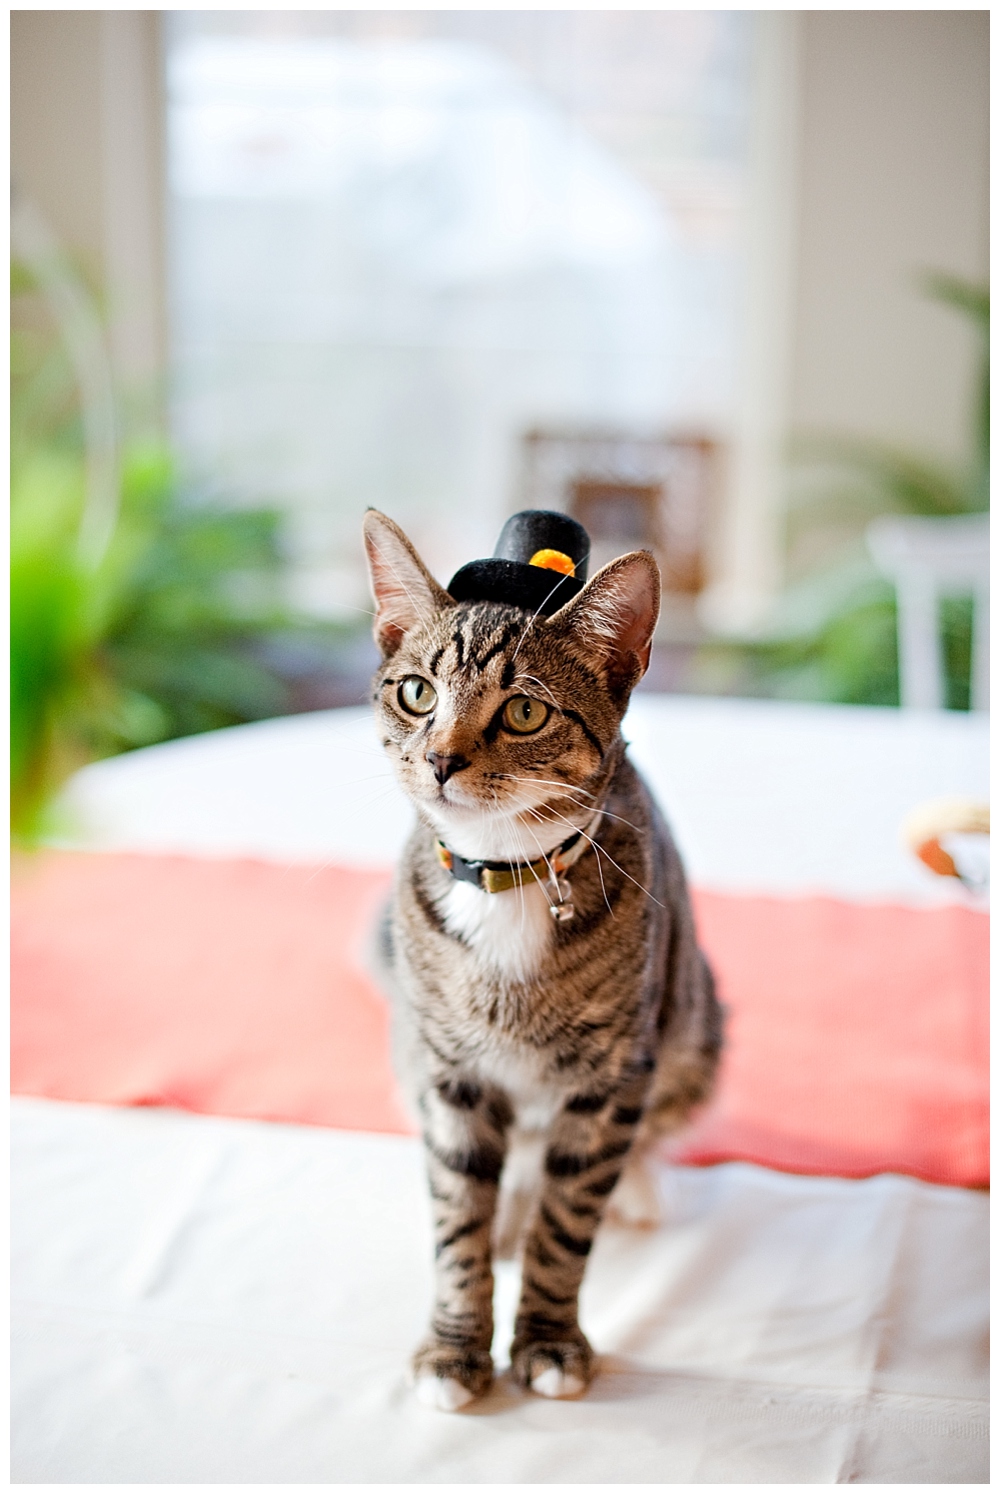 archie the cat tiger striped kitten with pilgrim hat